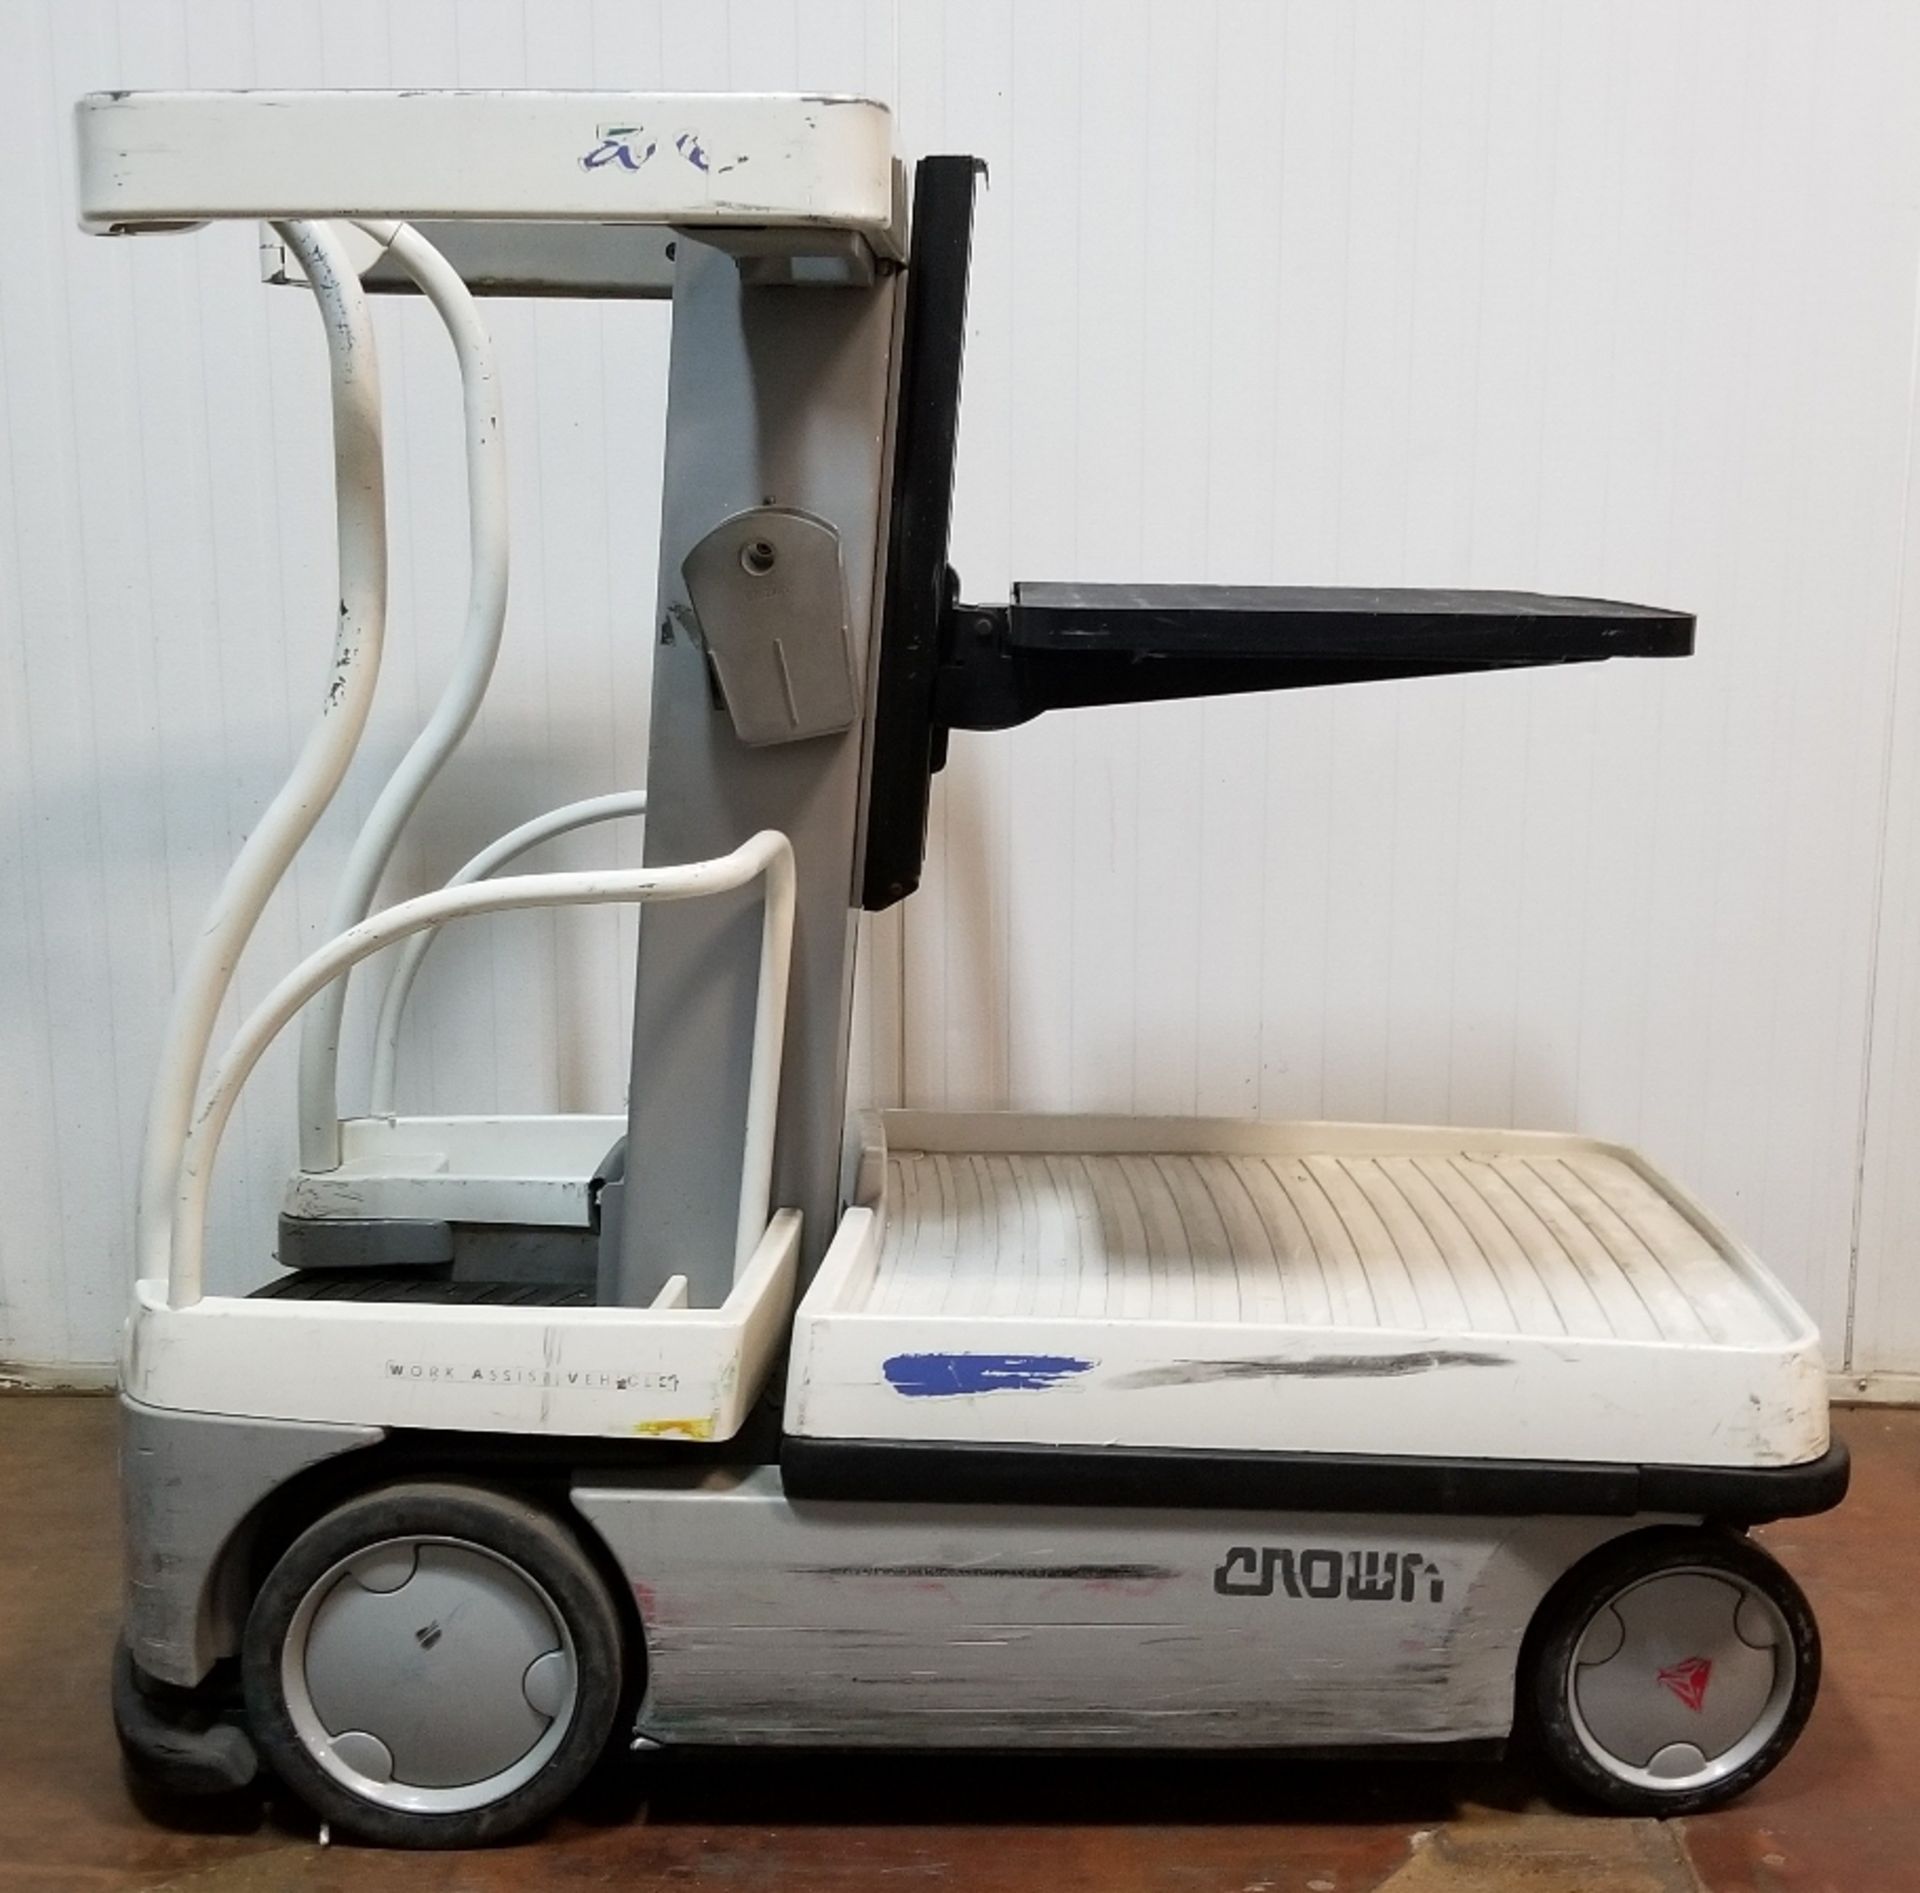 CROWN (2010) WAV50-118 450 LB. CAPACITY 24V ELECTRIC ORDER PICKER WITH 118" MAX. LIFT HEIGHT, 120V - Image 2 of 4